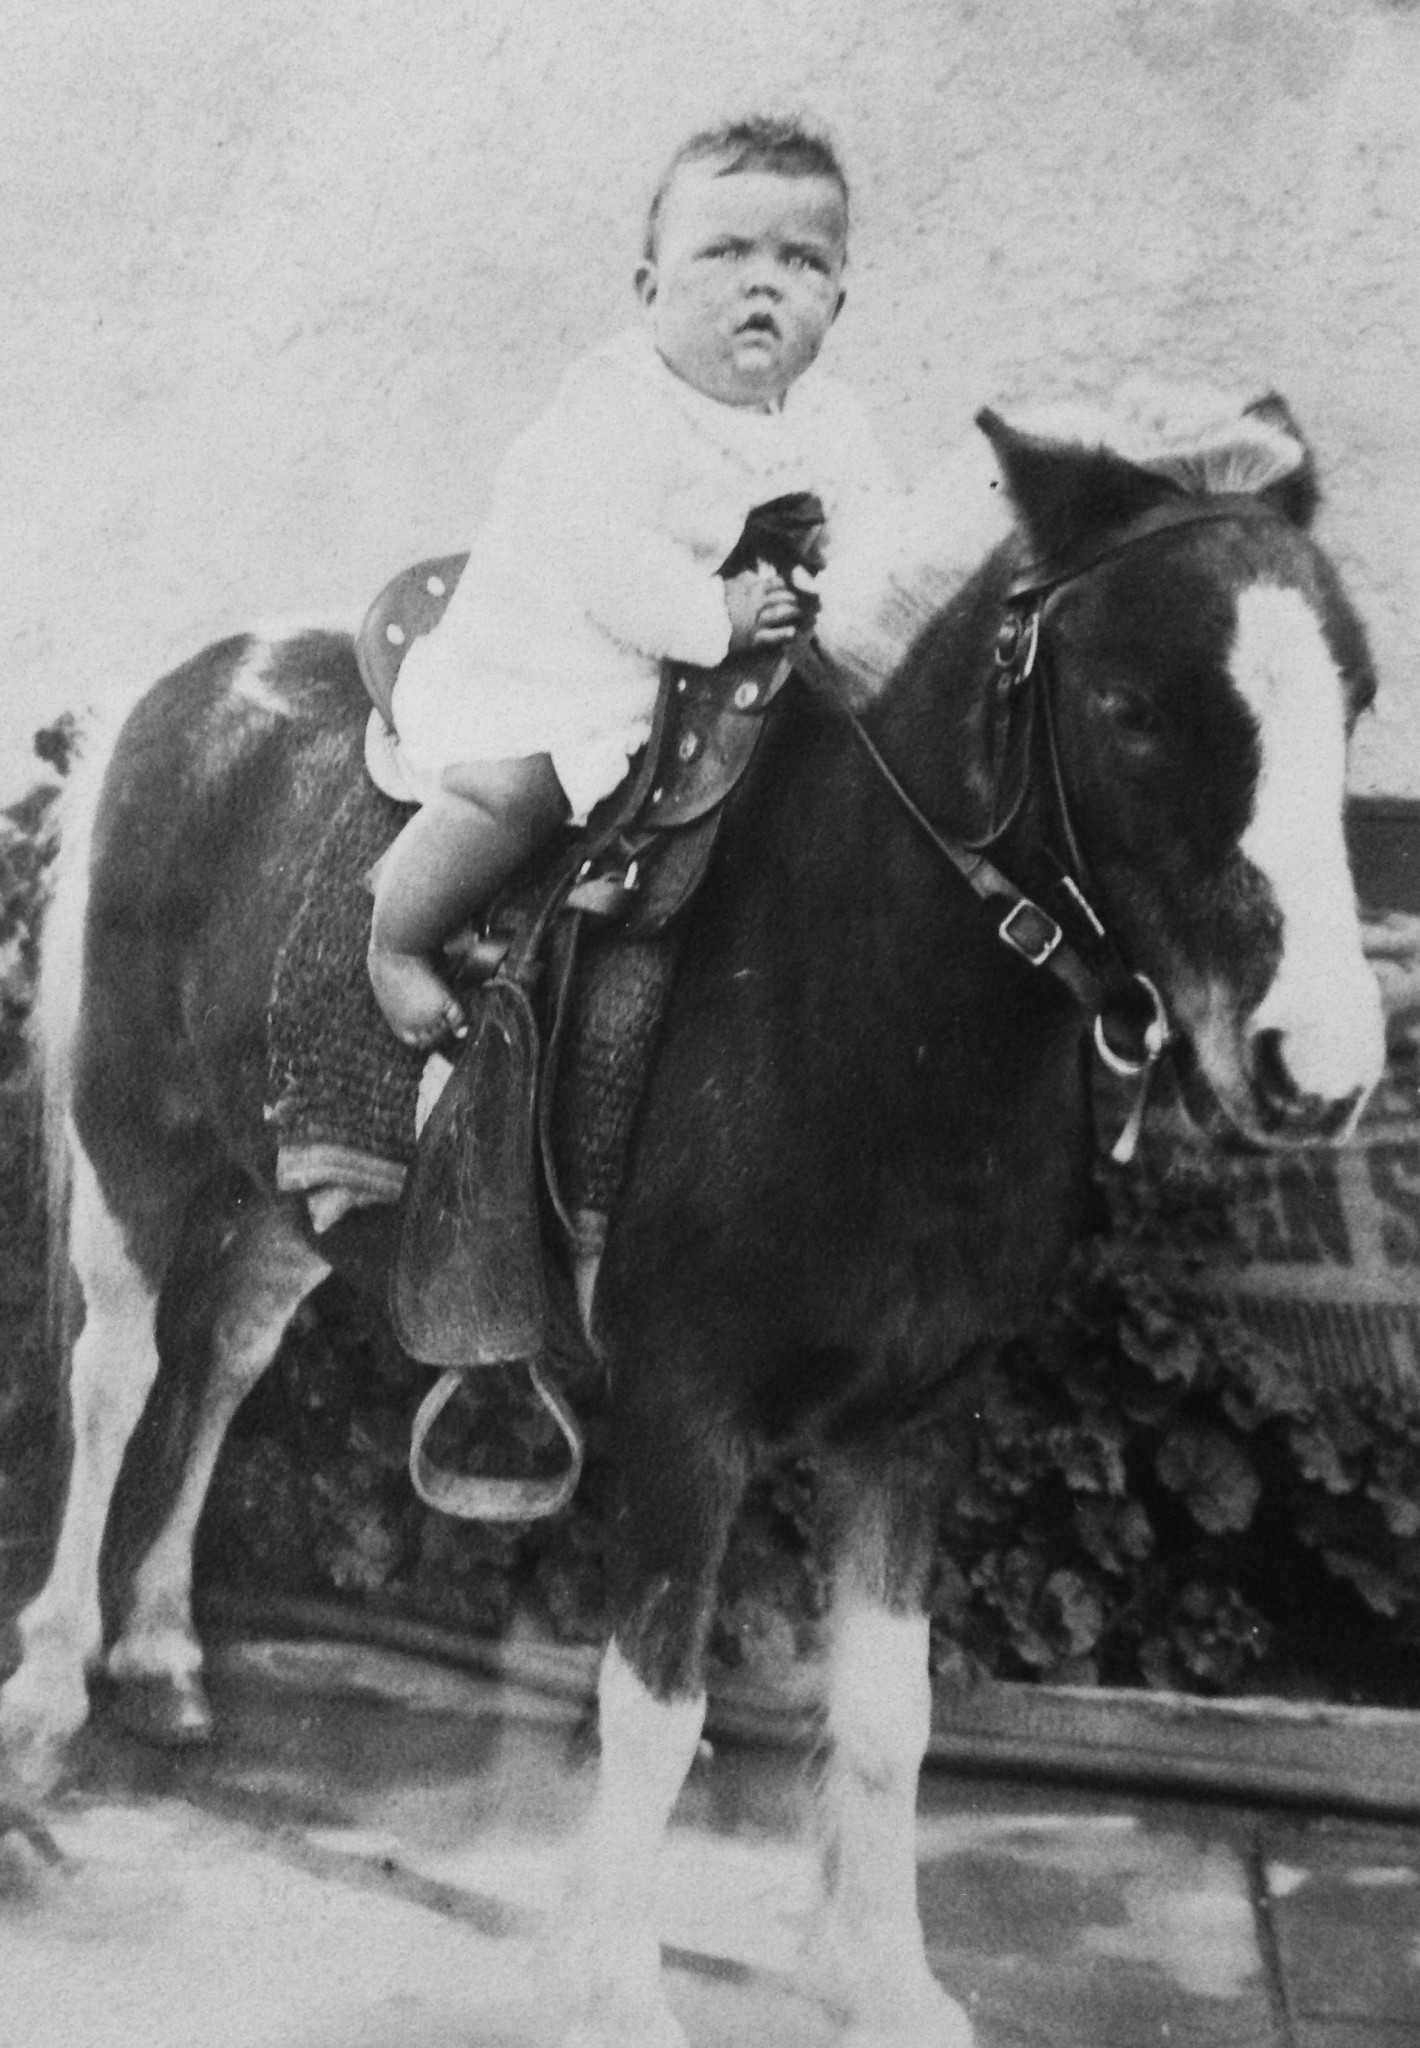 My mother riding around 1931. (Photo from family archives)